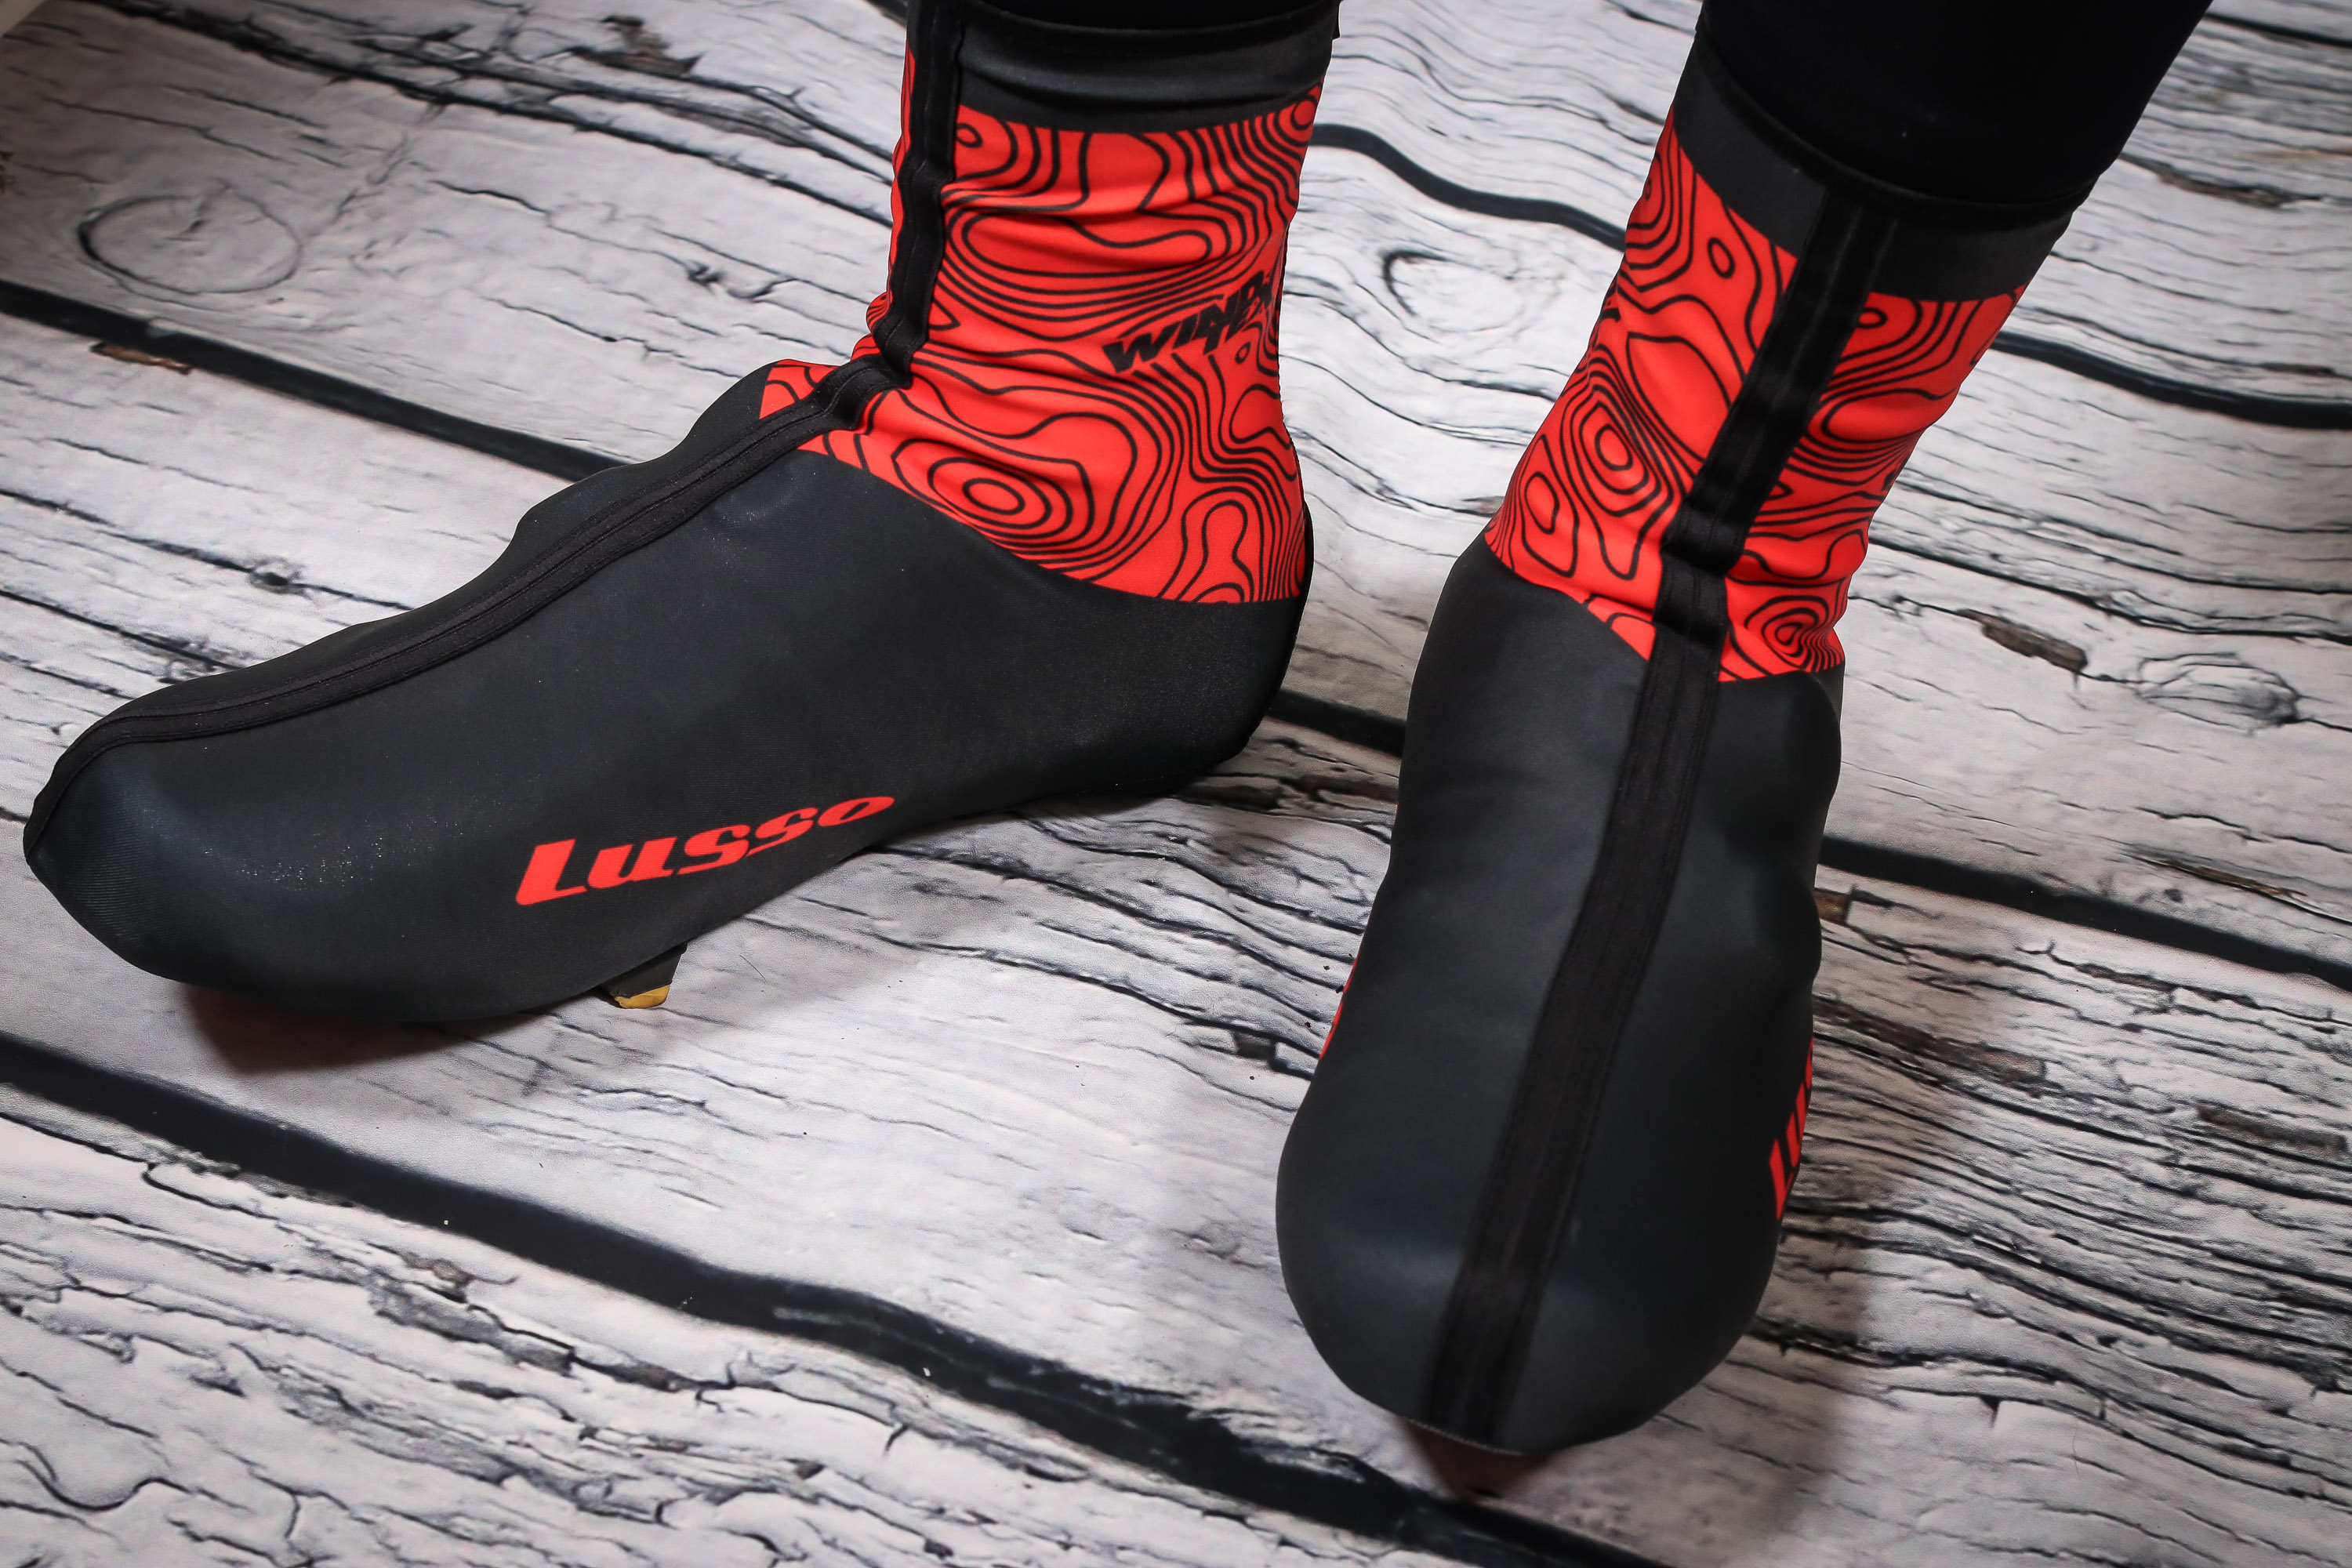 lusso windtex overshoes